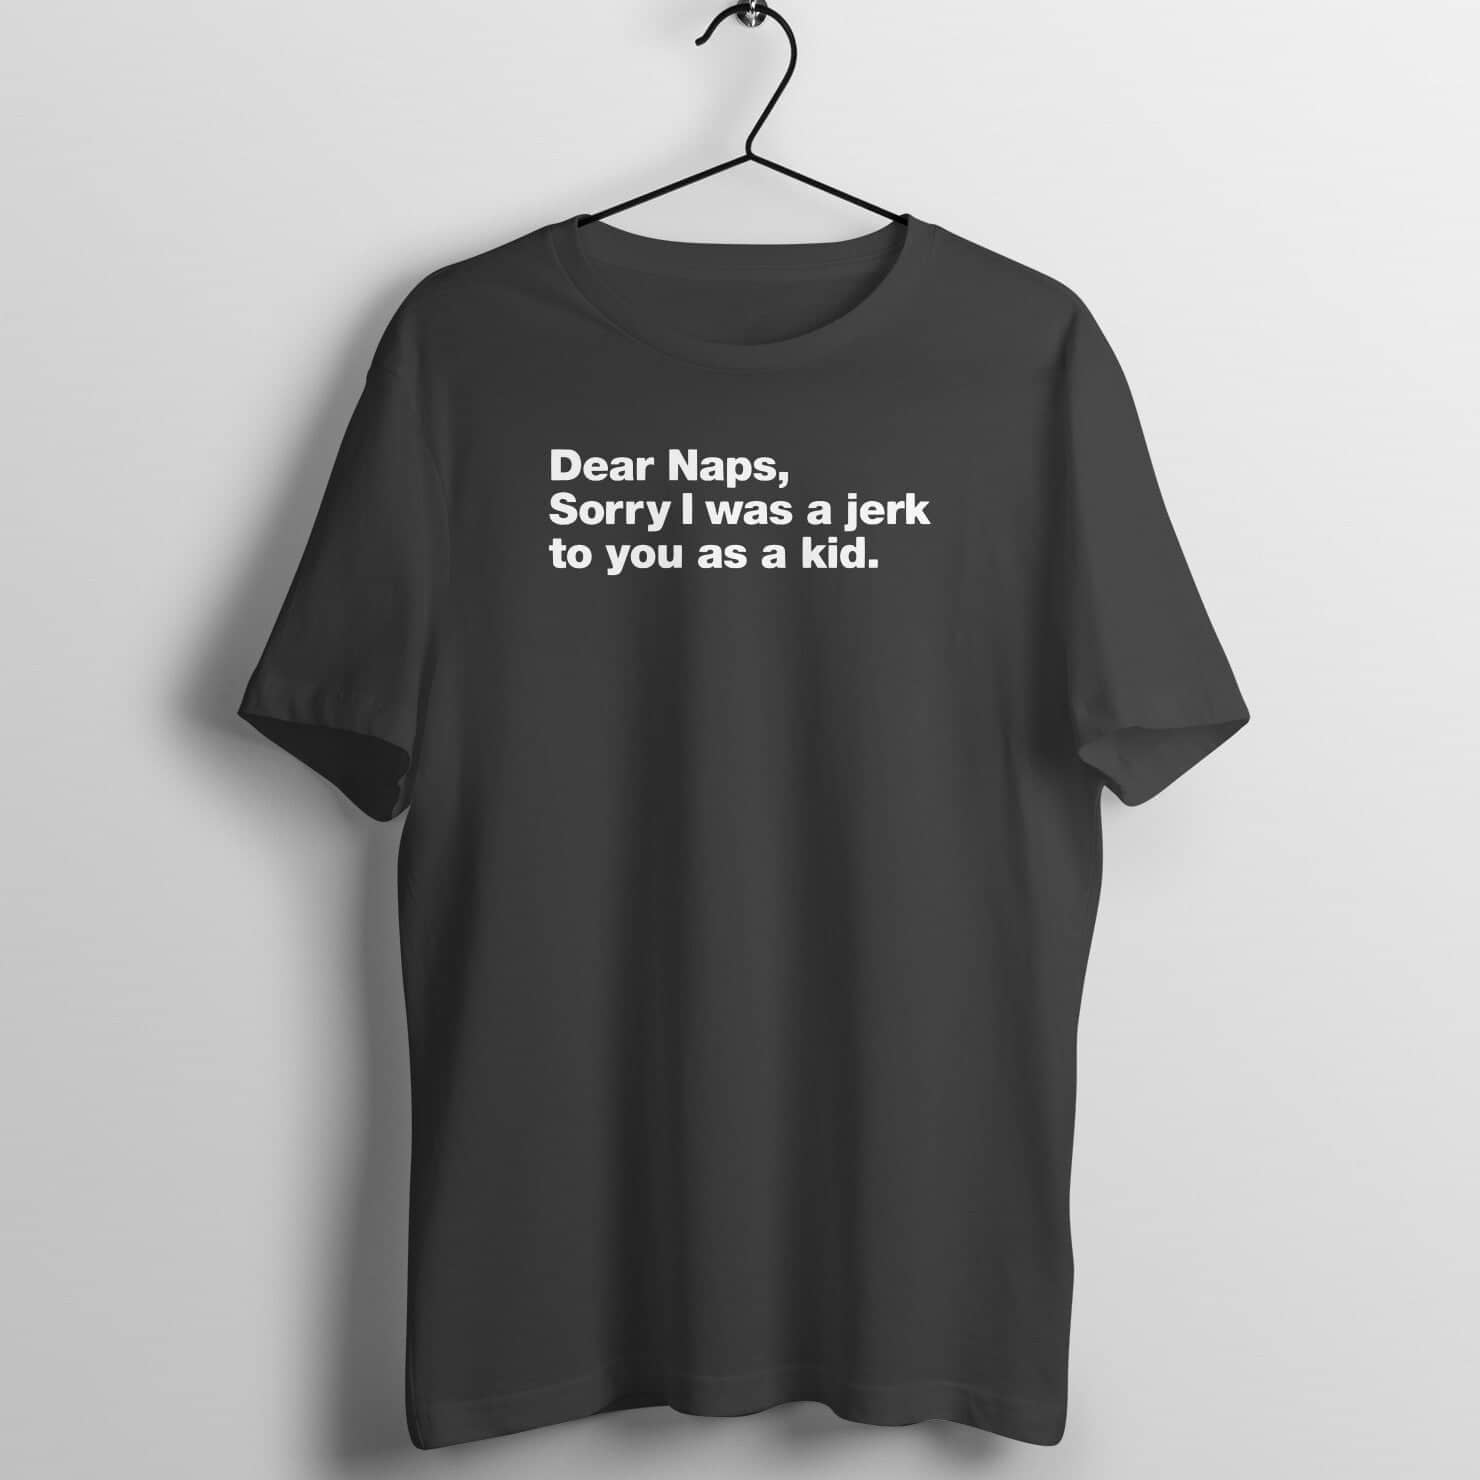 Dear Naps, Sorry Funny Black T Shirt for Men and Women freeshipping - Catch My Drift India